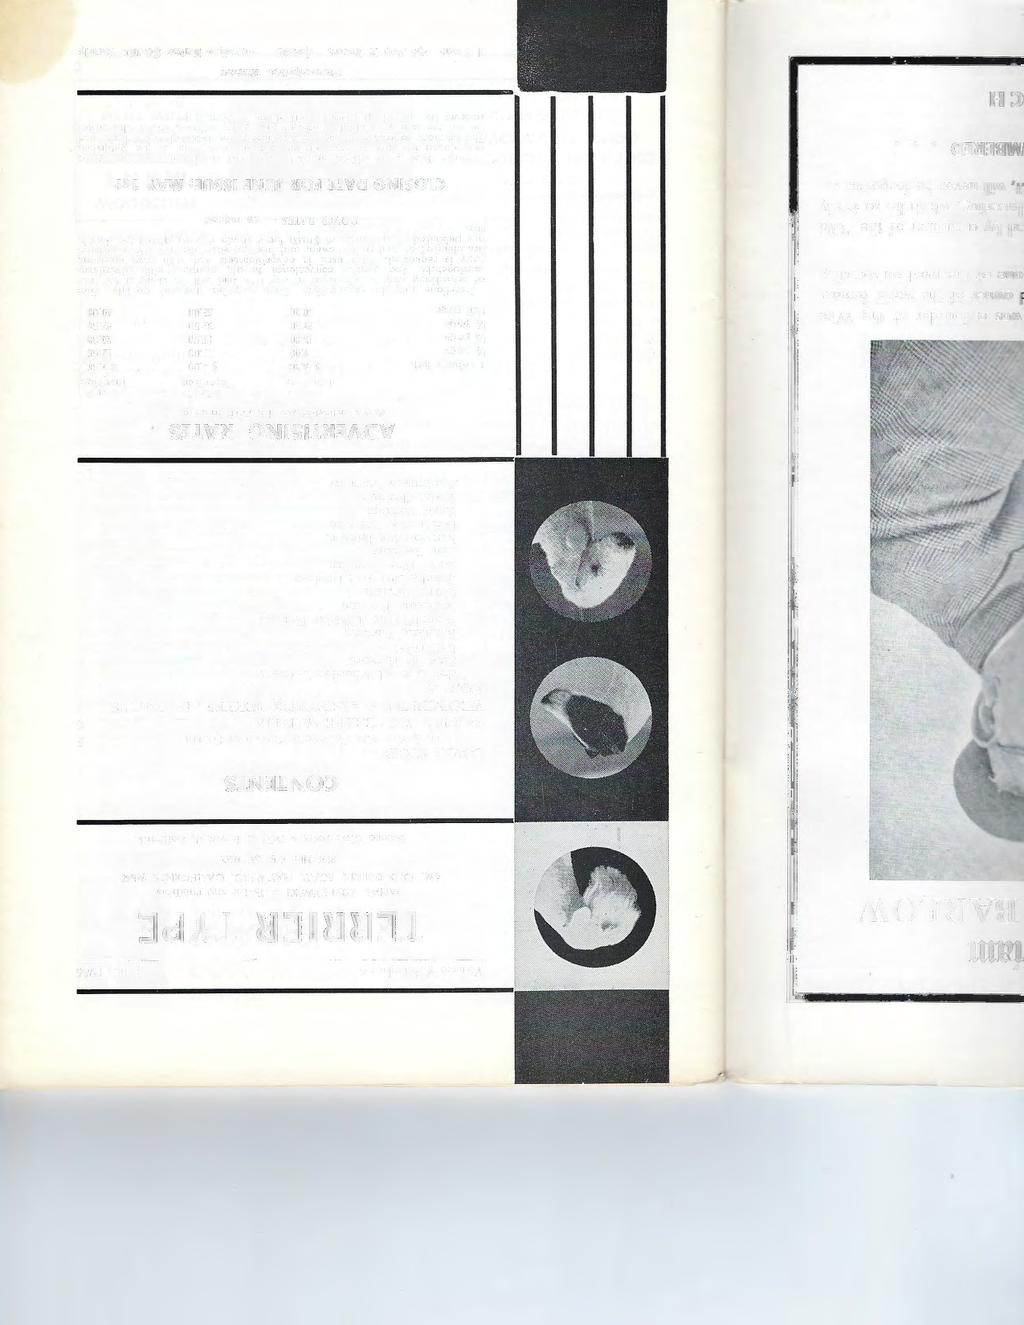 Volume V, Number 4 April, 1966 DANIEL KIEDROWSKI - Editor and Publisher 4961 OLD DUBLIN ROAD, HAYWARD, CALIFORNIA 94546 PHONE: 415-581-6062 Second Class Postage Paid at Hayward, California CONTENTS